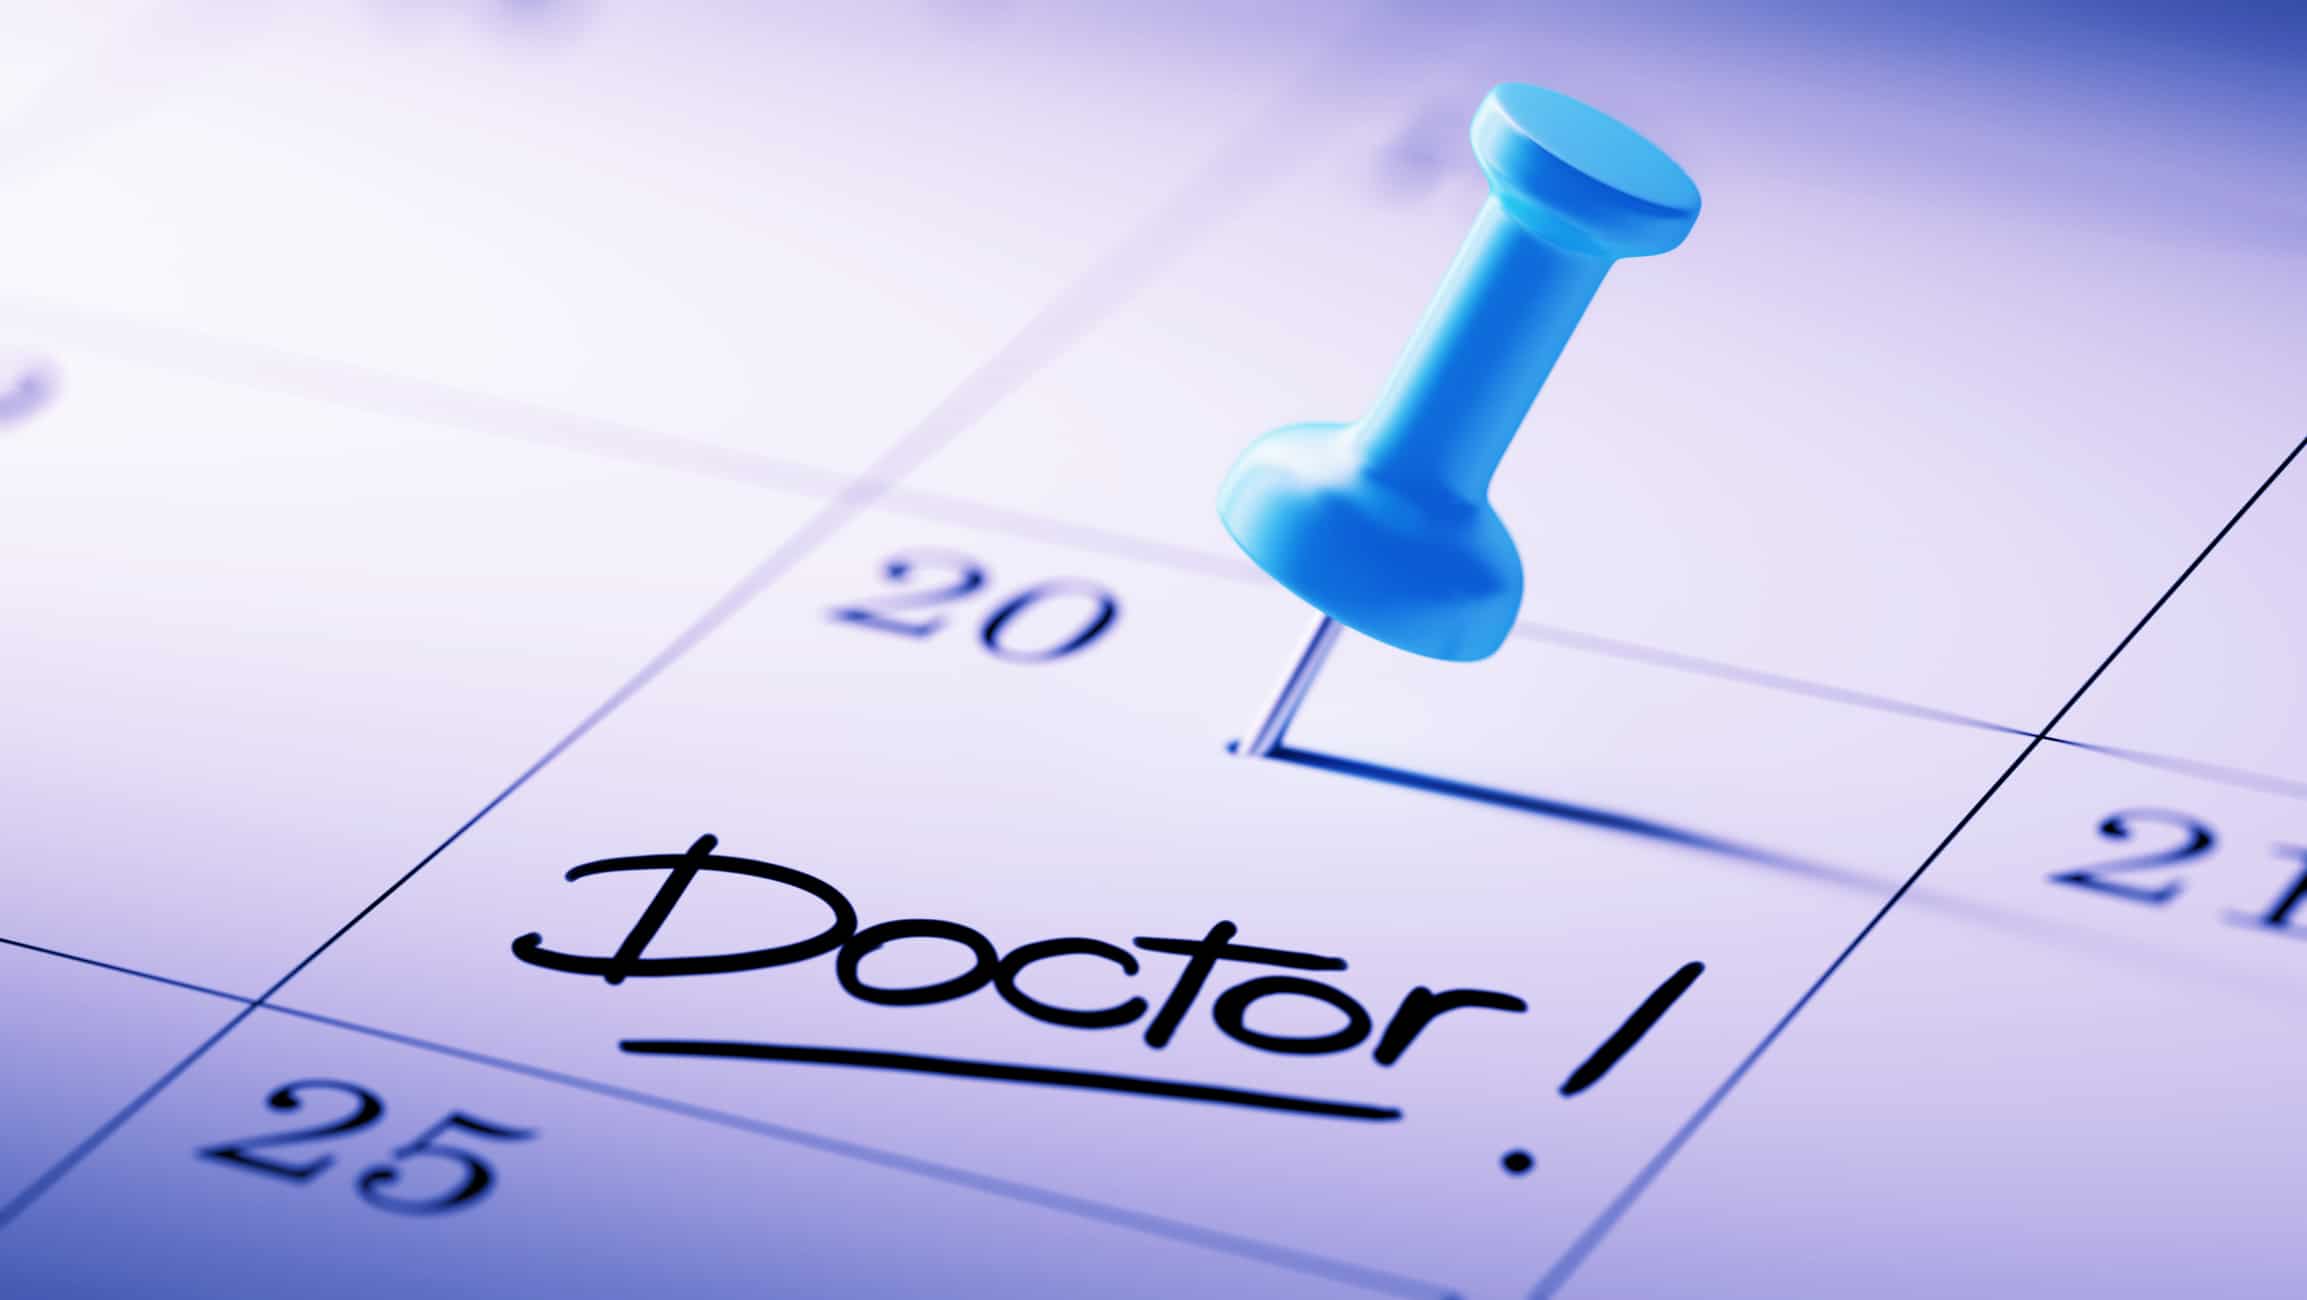 Concept image of a Calendar with a blue push pin. Closeup shot of a thumbtack attached. The words Doctor written on a white notebook to remind you an important appointment.